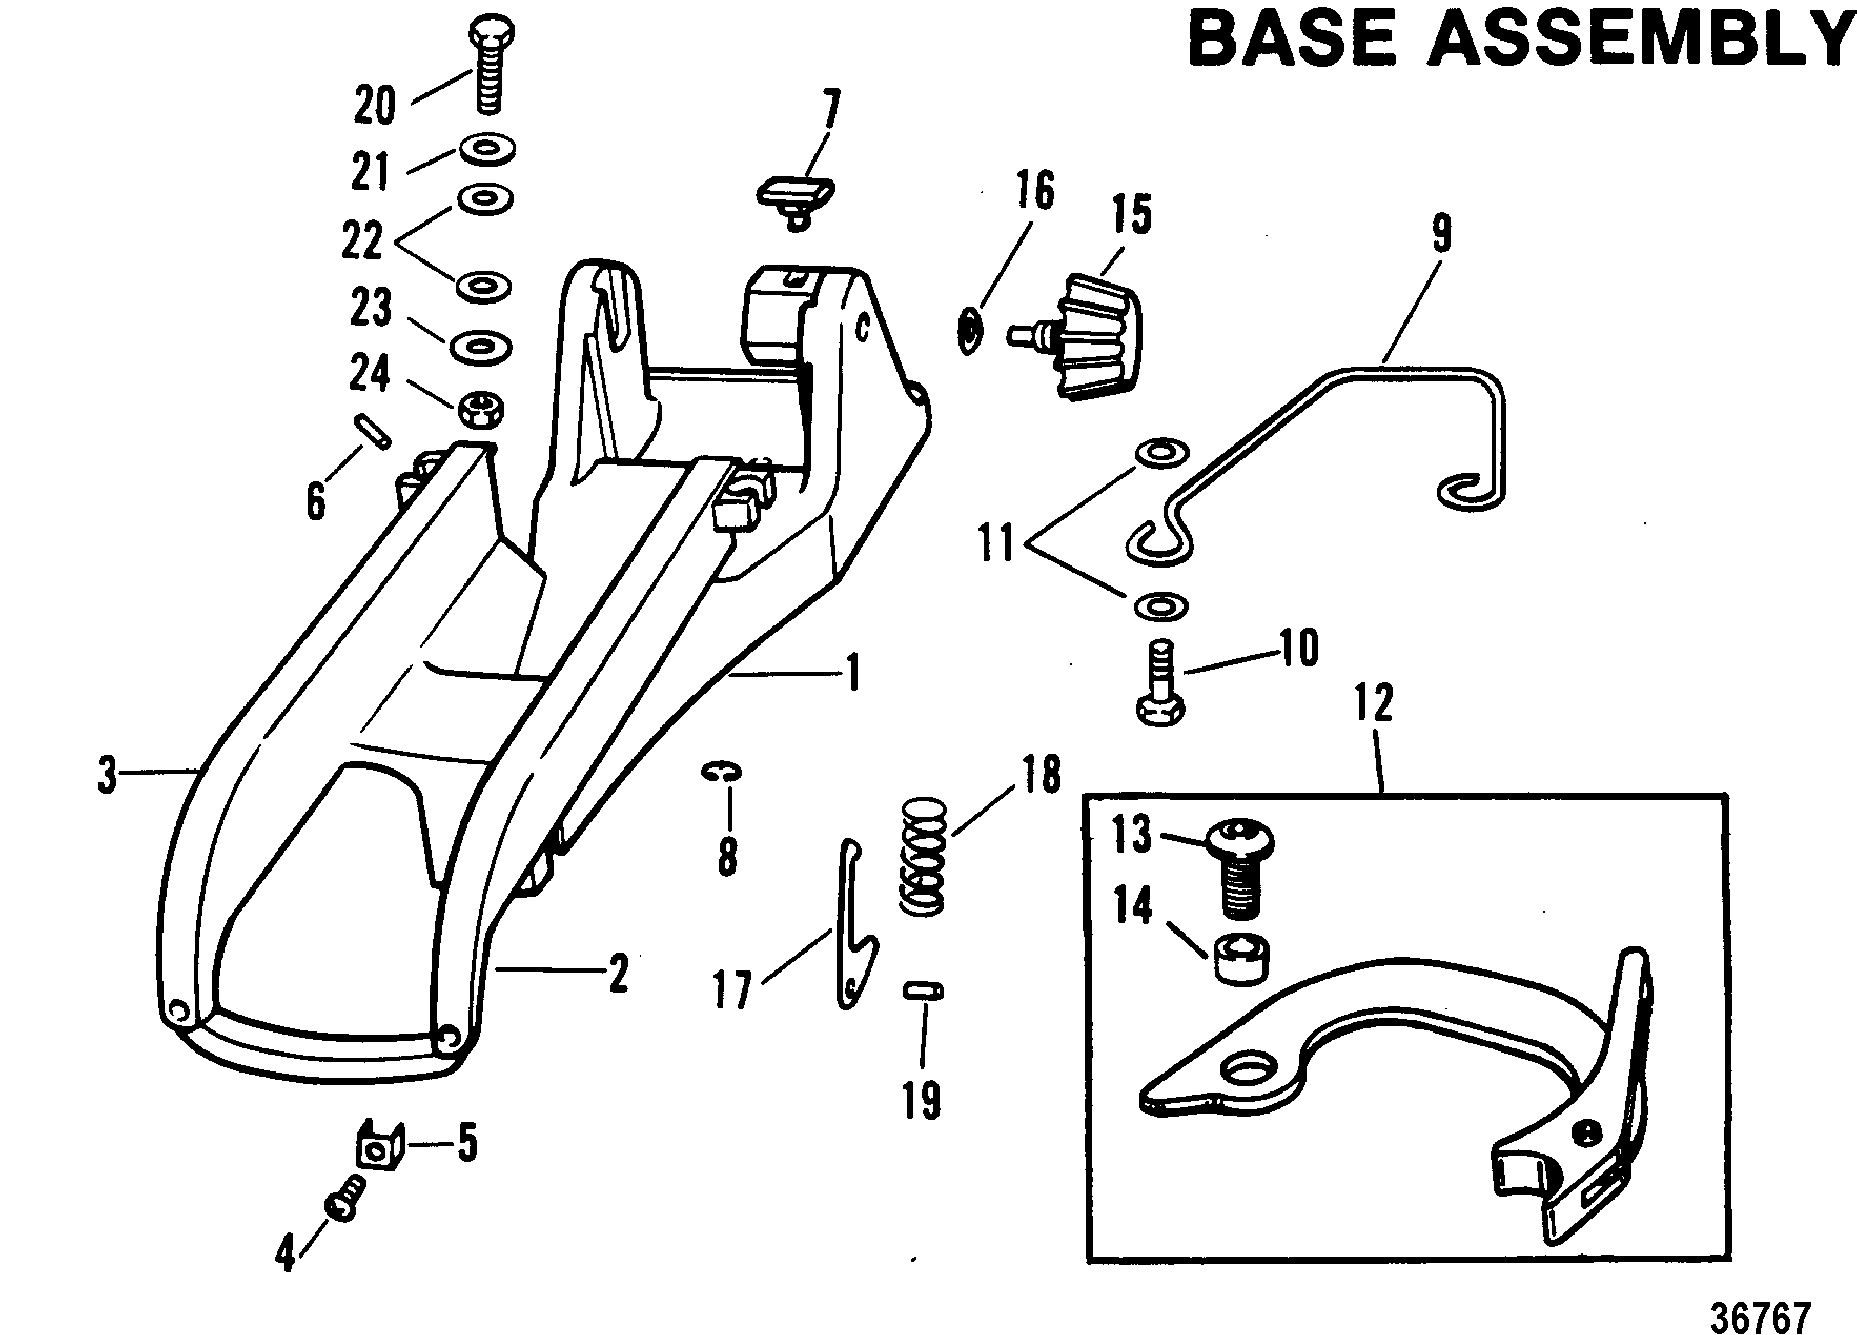 BASE ASSEMBLY RC AND DM